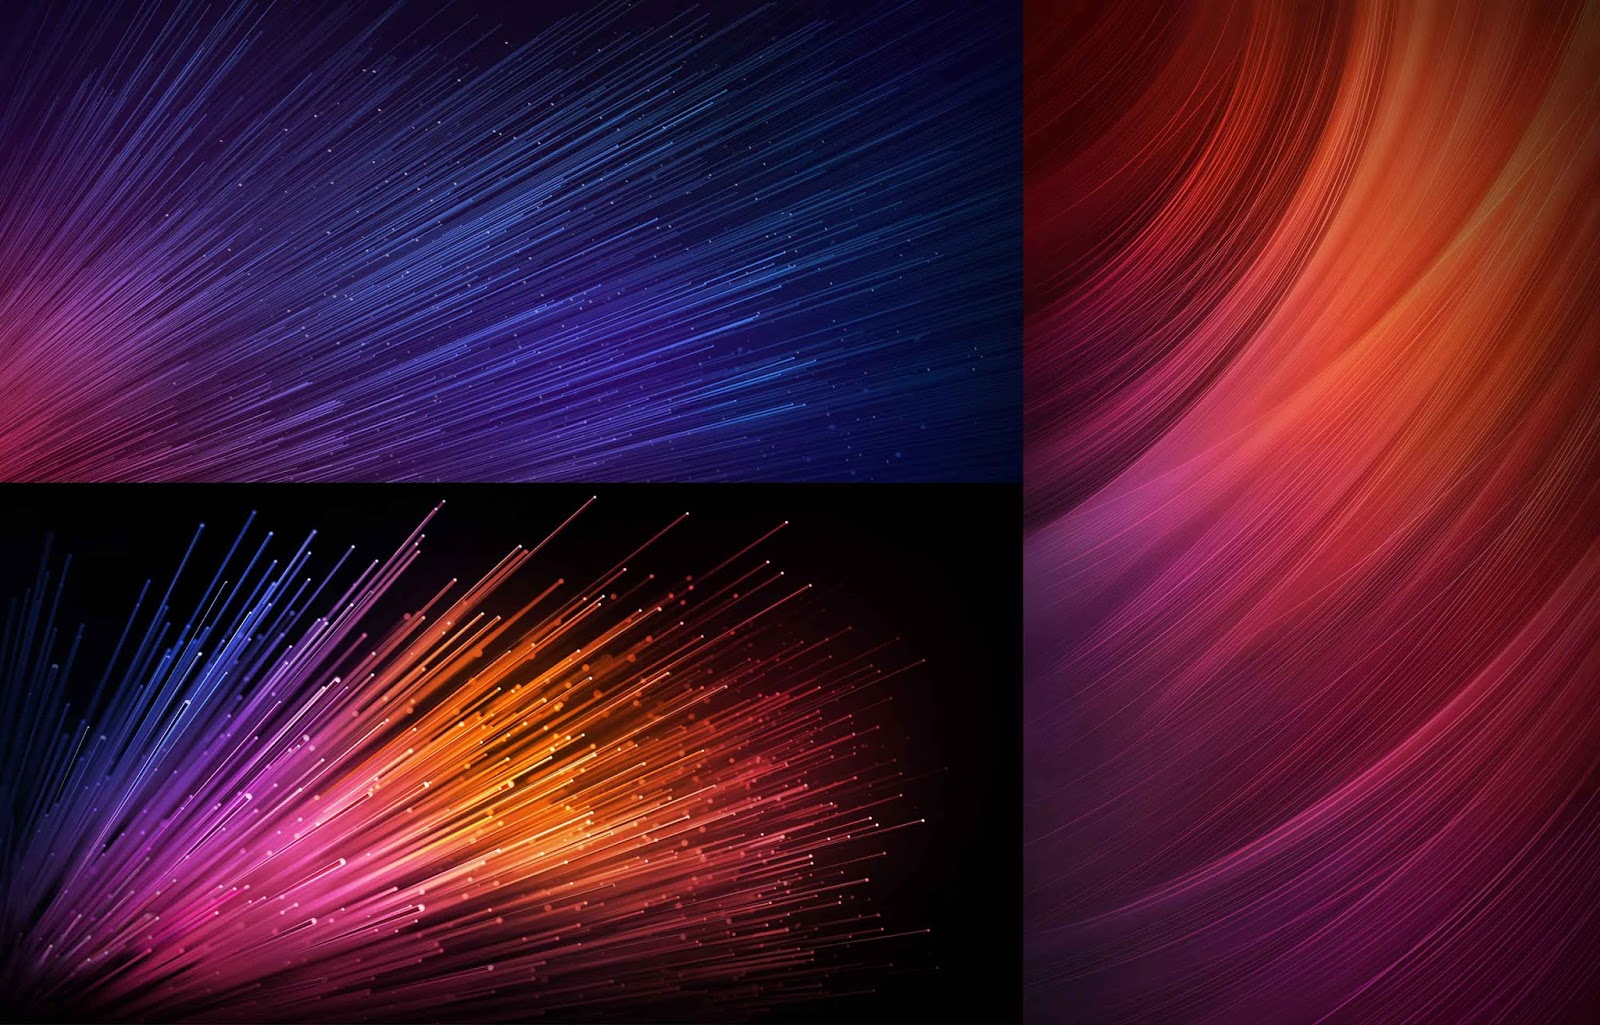  Xiaomi  Mi Notebook Air Redmi Pro Wallpapers  Now Up For 